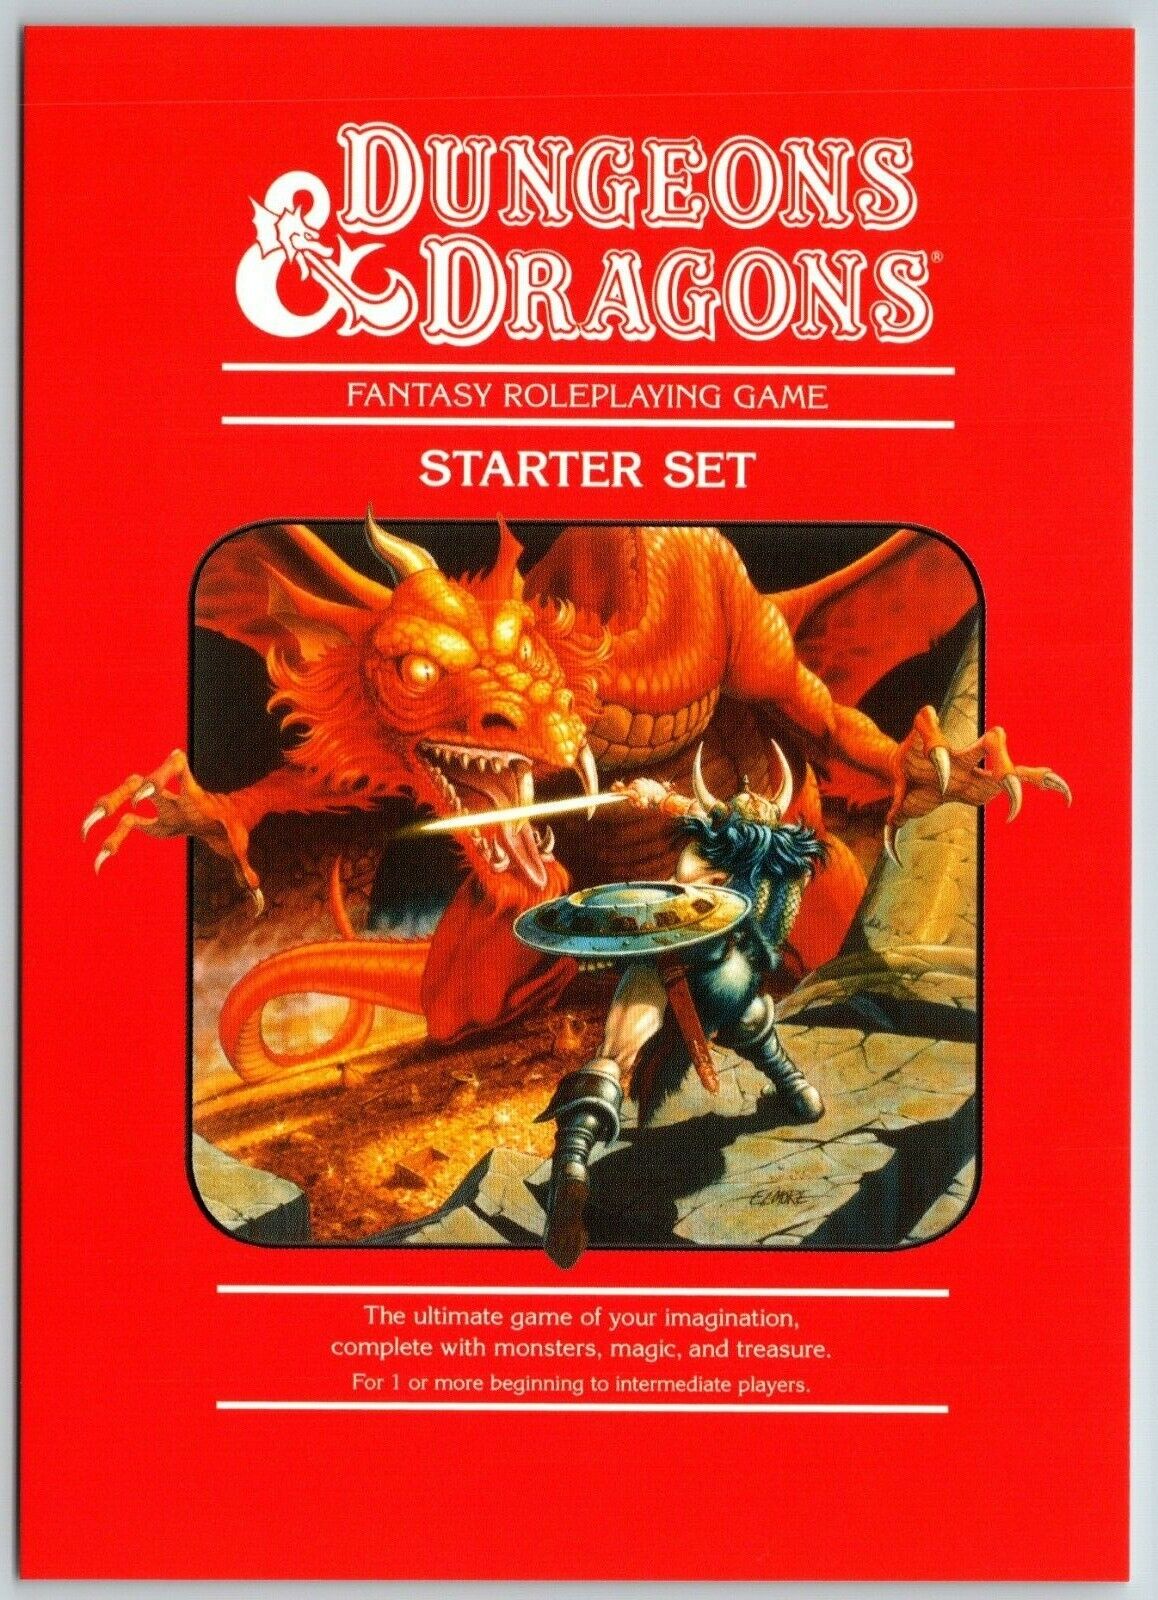 Dungeons & Dragons, Cover, Basic Rules Set 1 (Red Box) L Elmore, 1983 - Postcard